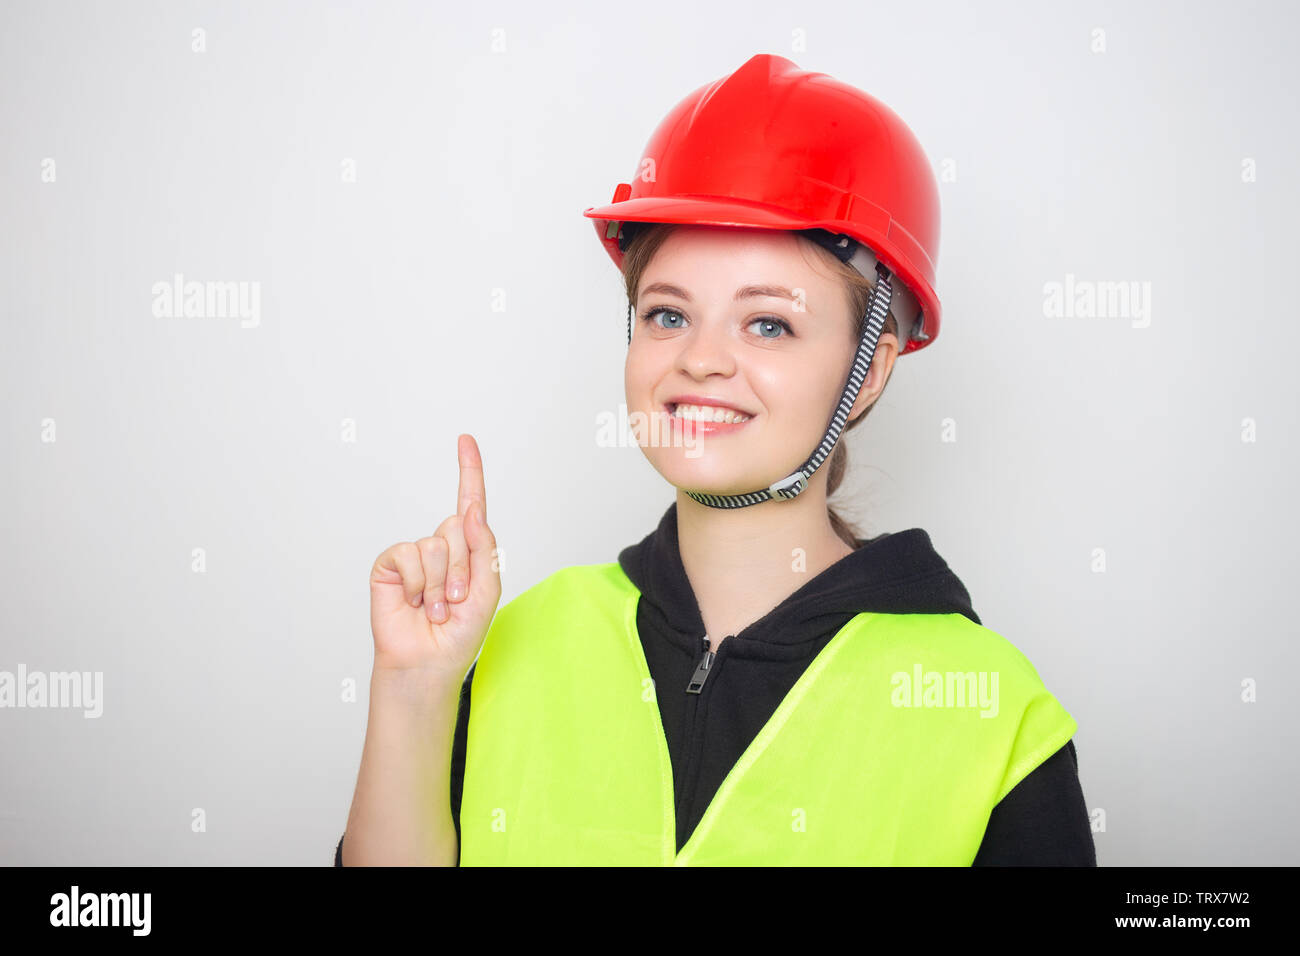 Young caucasian woman wearing red safety hard hat and reflective vest, smiling Stock Photo